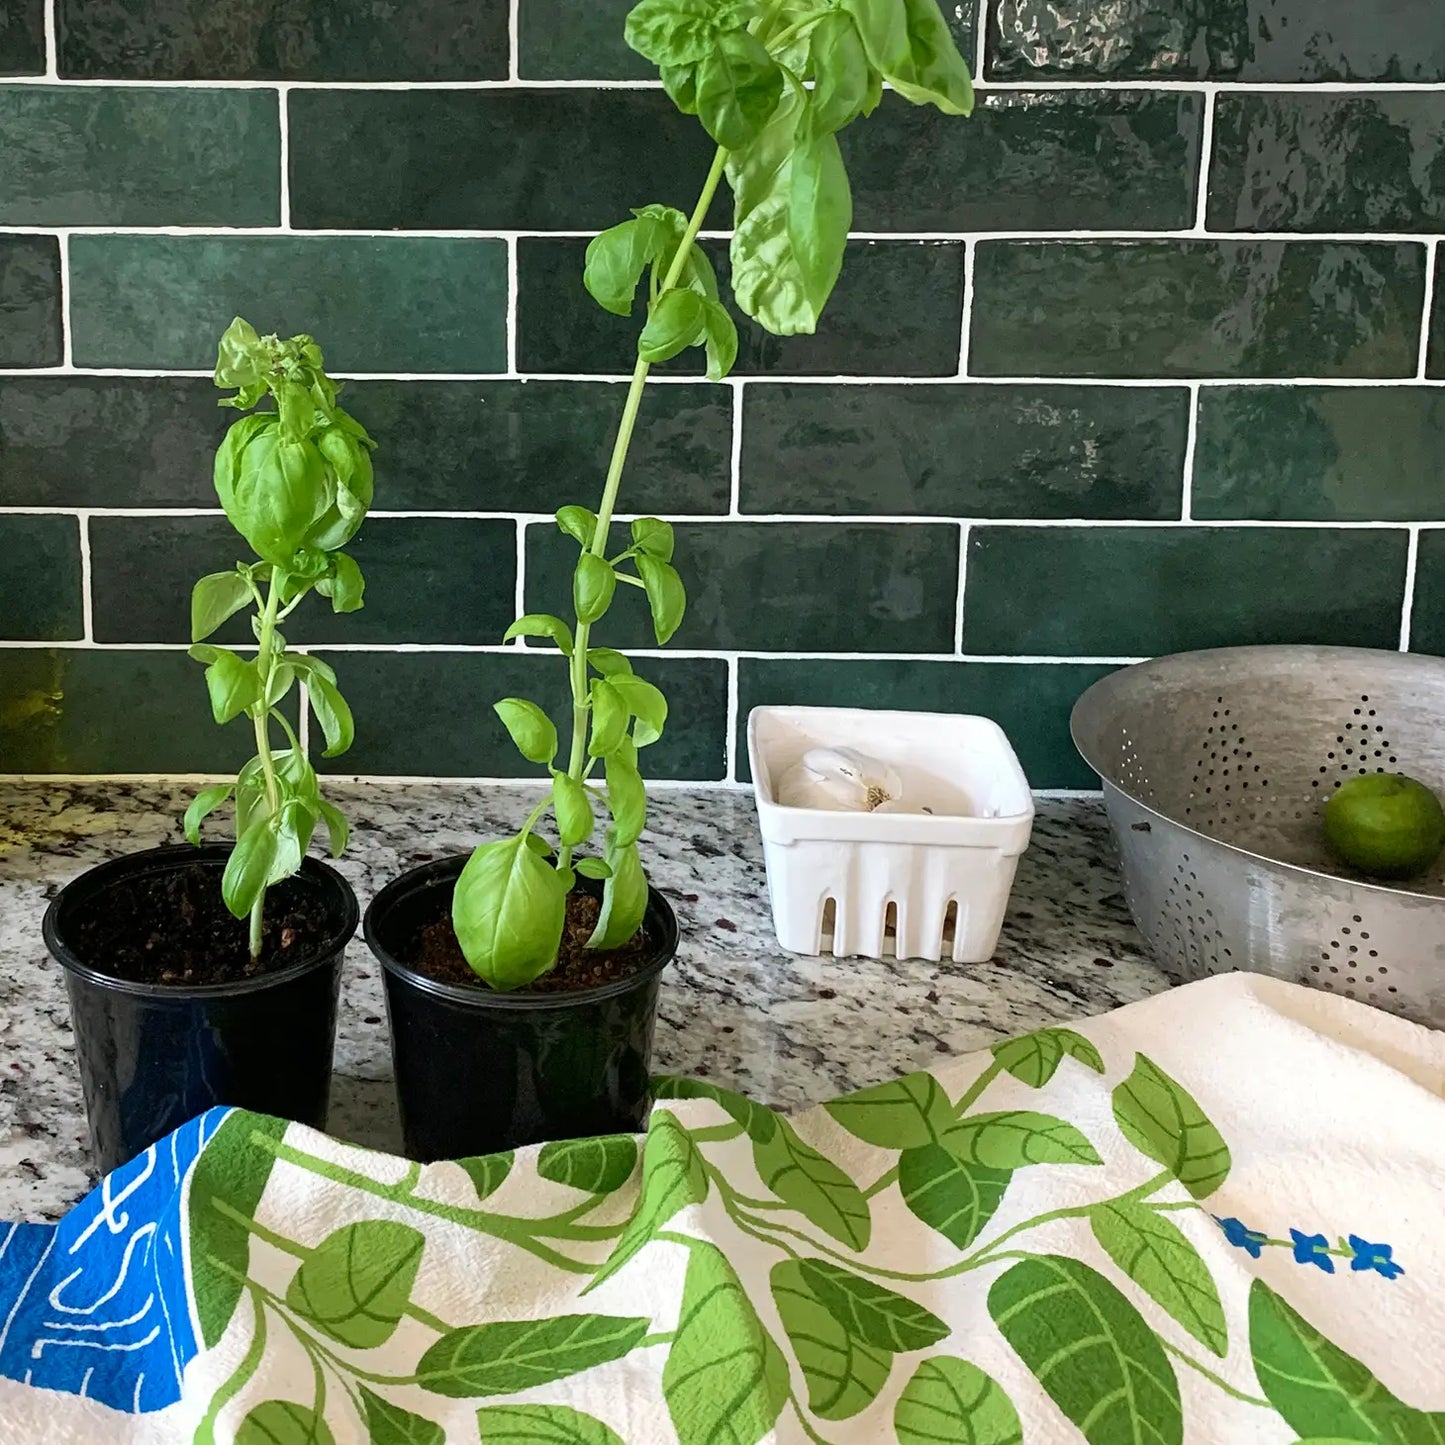 All The Neighborgoods dish towels add a bright pop of color to your kitchen. Made from 100% flour sack cotton, our Basil dish towel will only get softer and more absorbent over the years in your kitchen. This generously sized dish towel can handle small and big tasks in the kitchen as well as household chores.